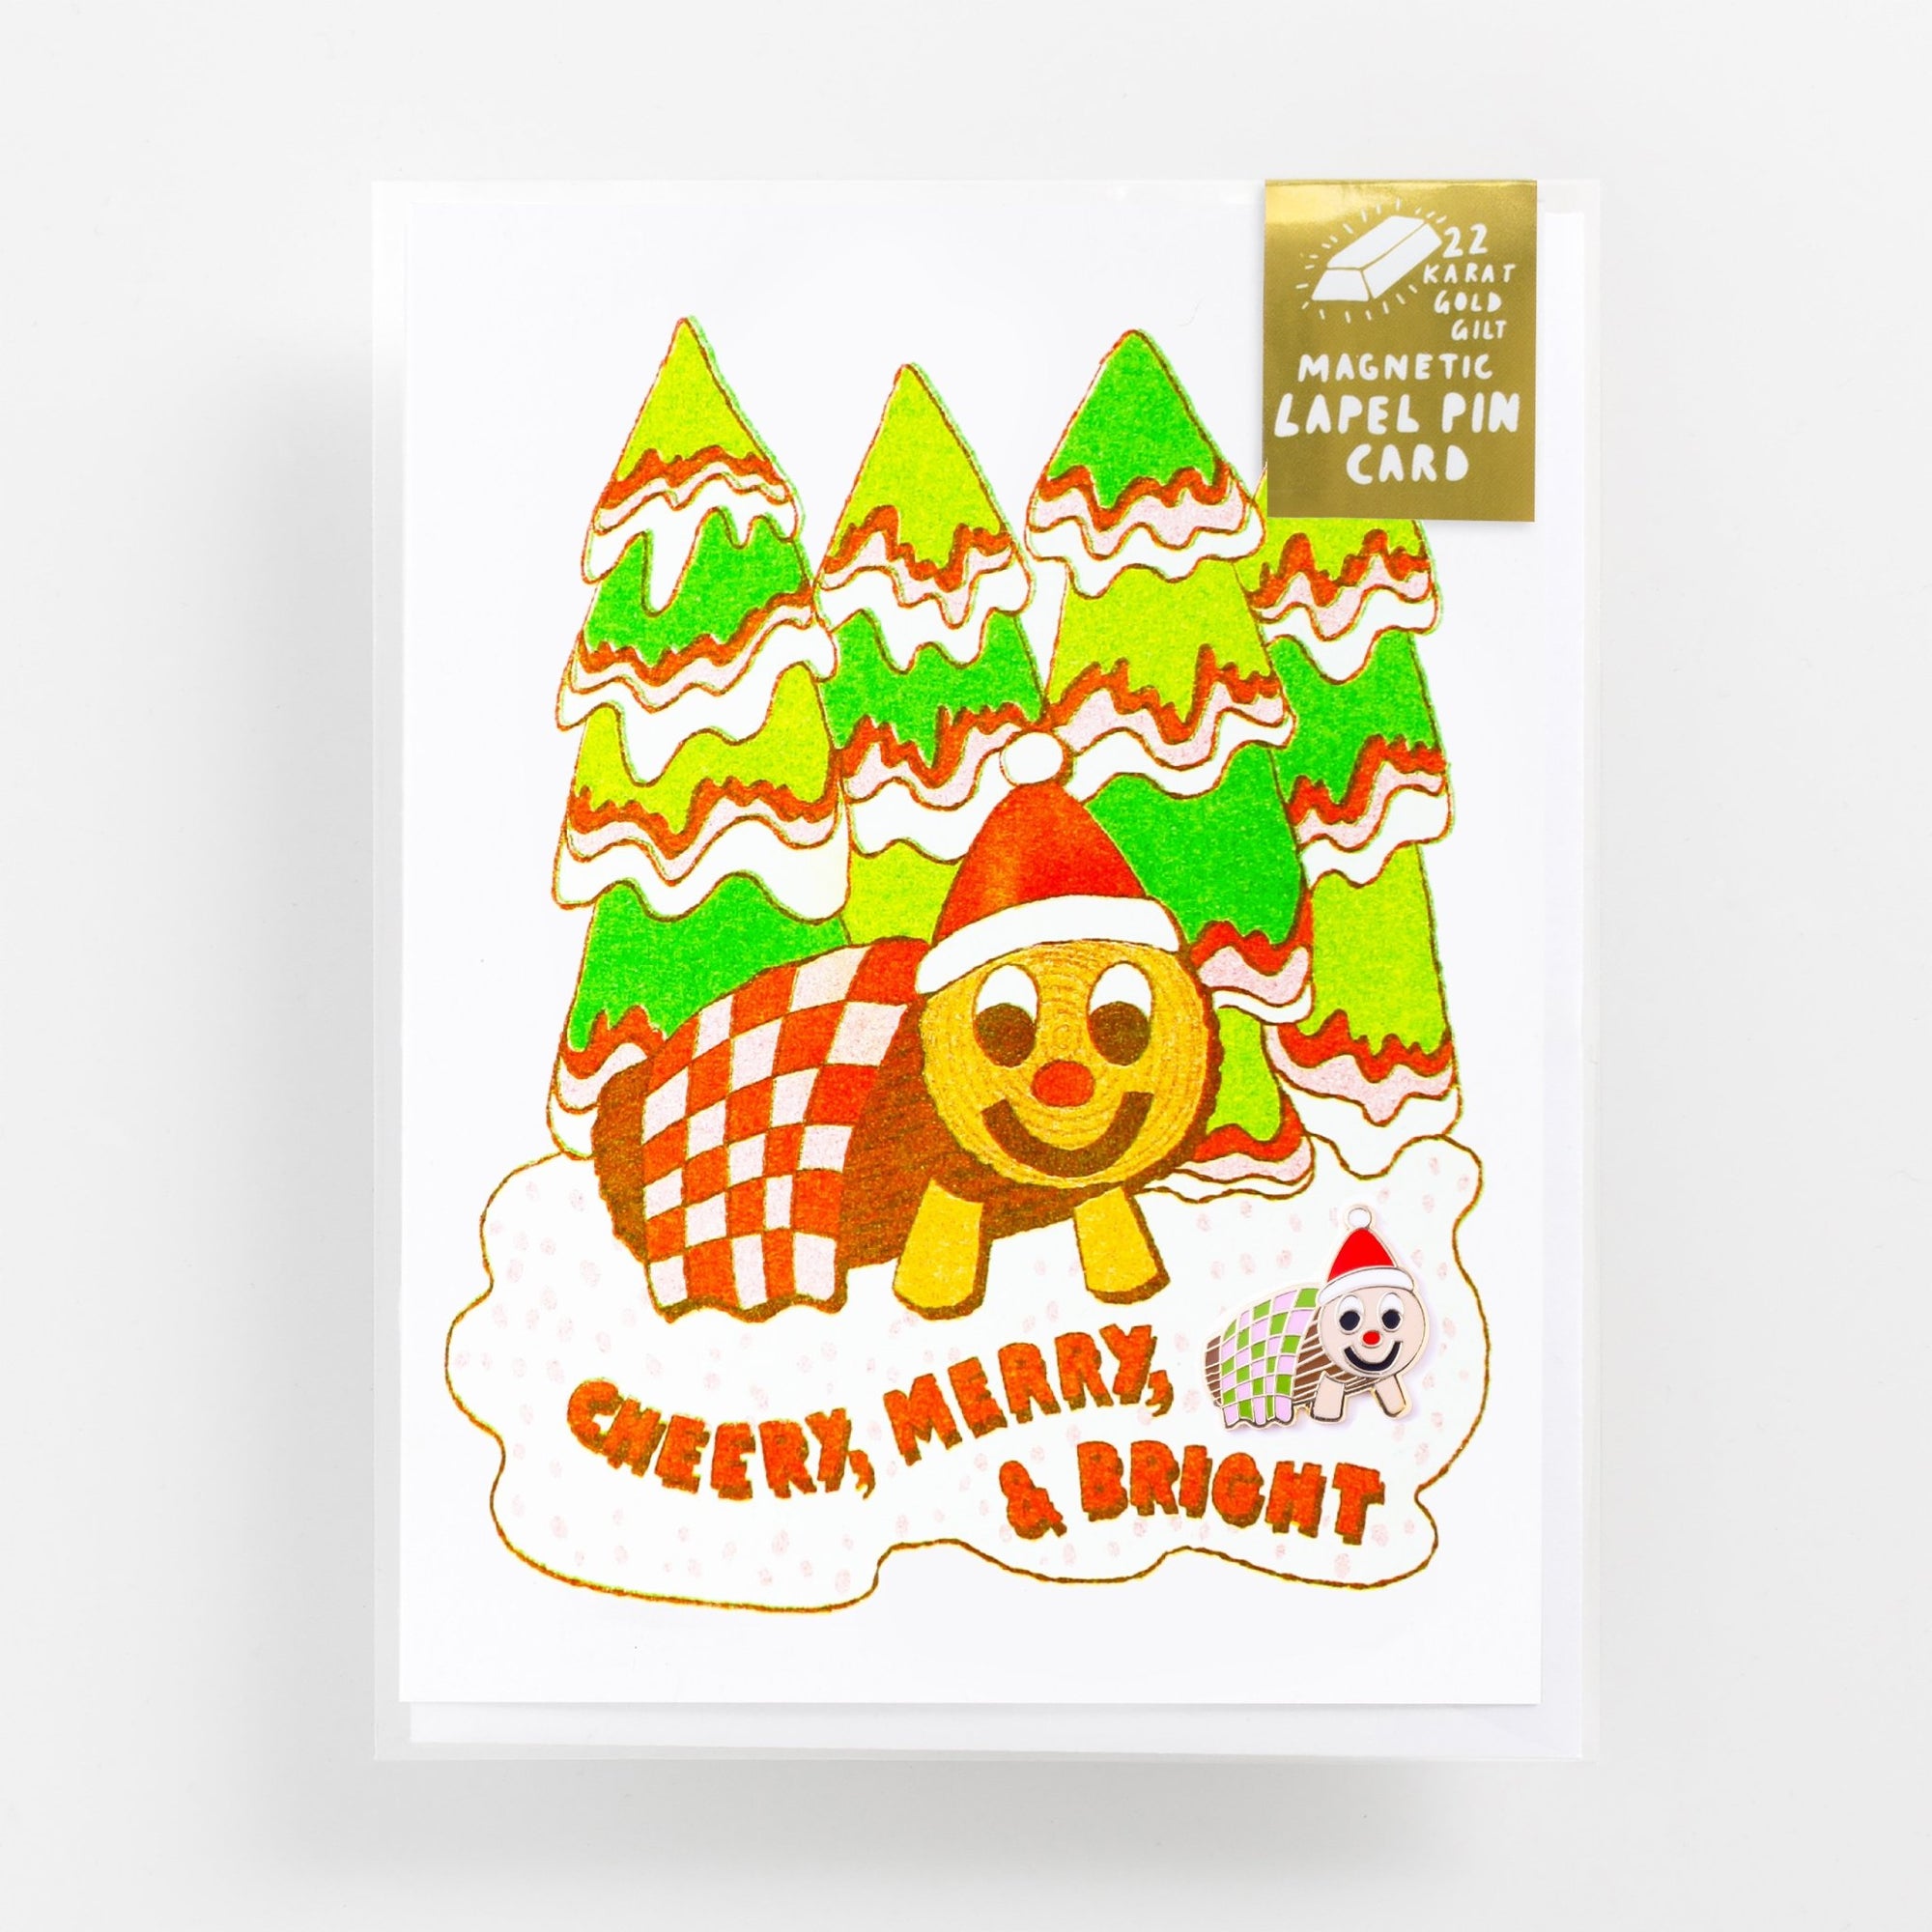 Cheery, Merry + Bright - Lapel Pin Card - Yellow Owl Workshop